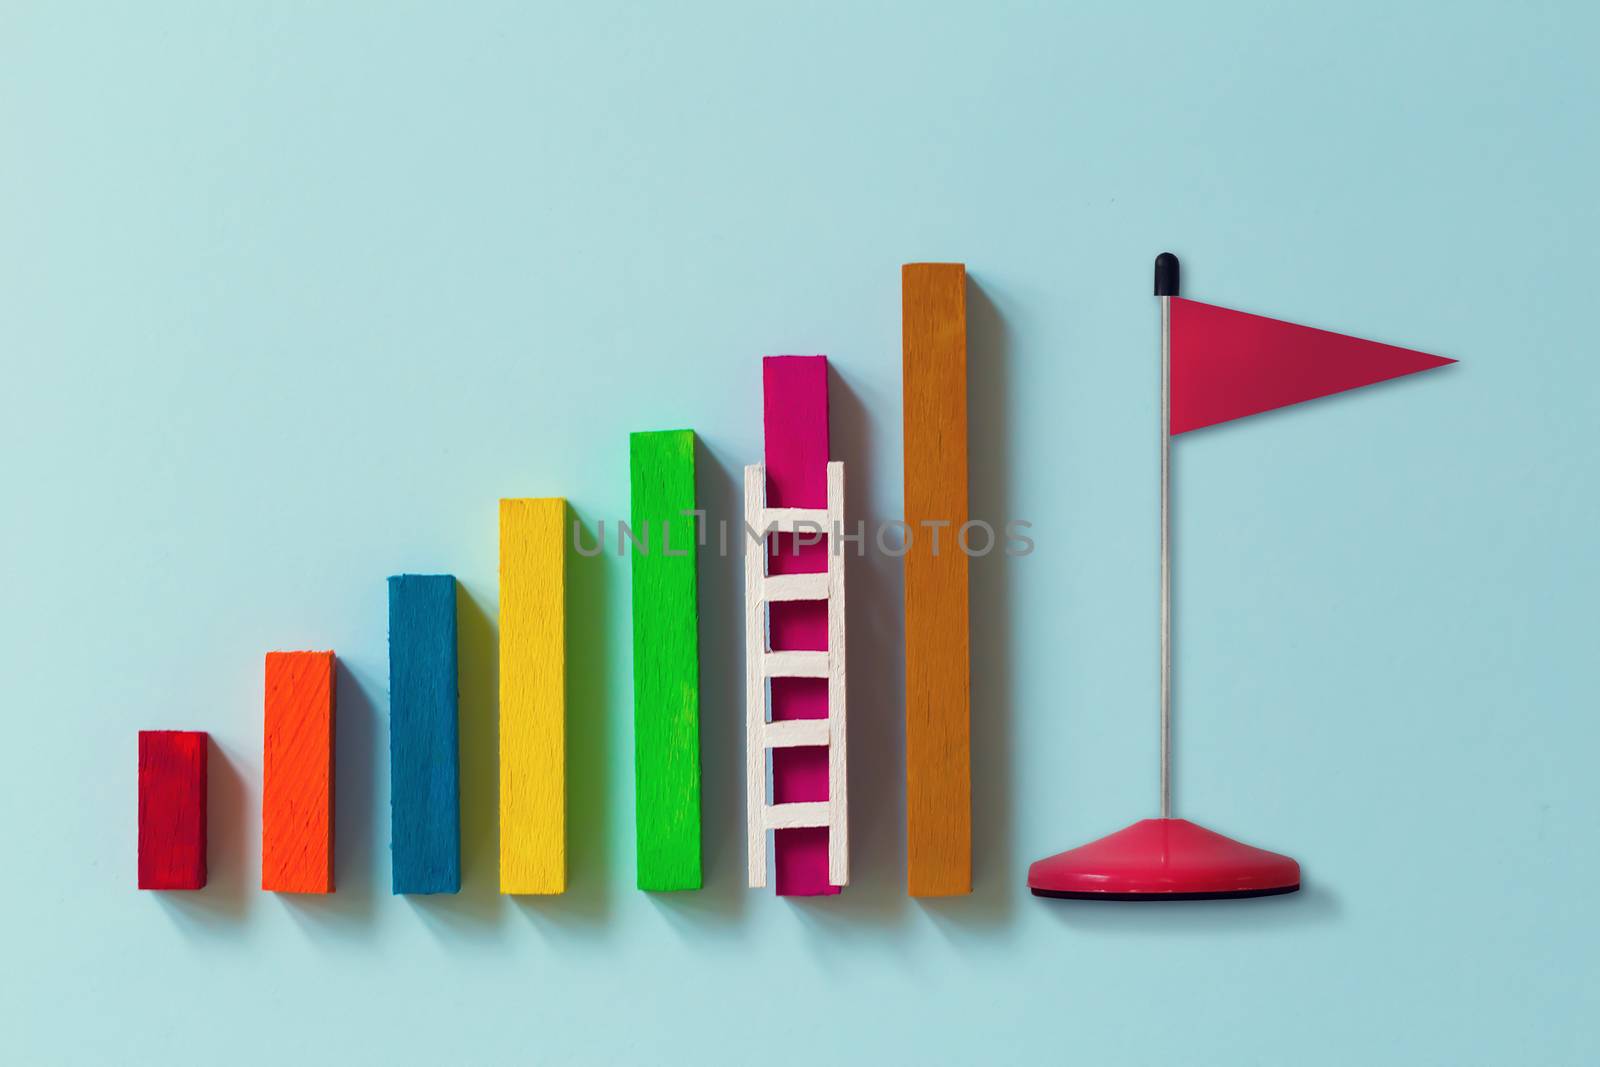 Arrange rising bar graph with stair and red flag. Concept of analysing information / Business concept growth success process: depicts the increment in annual financial budget or revenues of long term